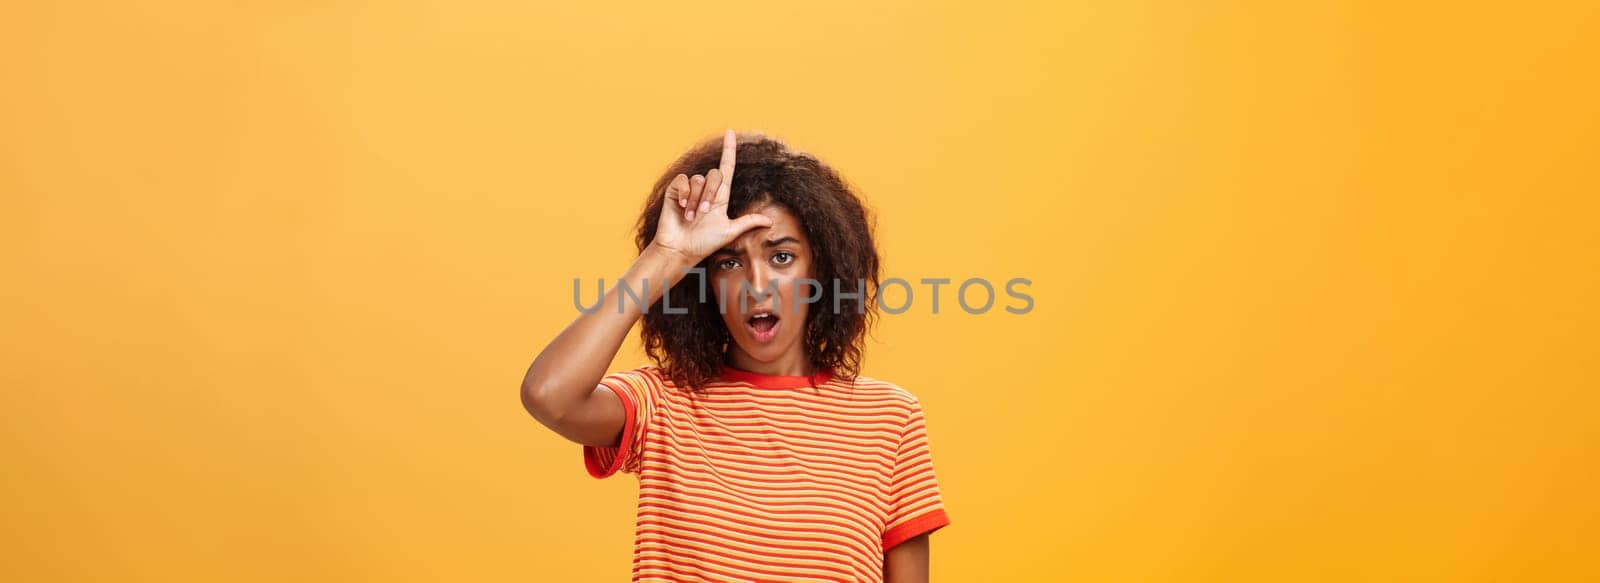 Girl thinks she loser. Portrait of gloomy bothered and displeased african american woman with afro hairstyle showing l word over forehead complaining feeling gloomy and unhappy over orange background by Benzoix